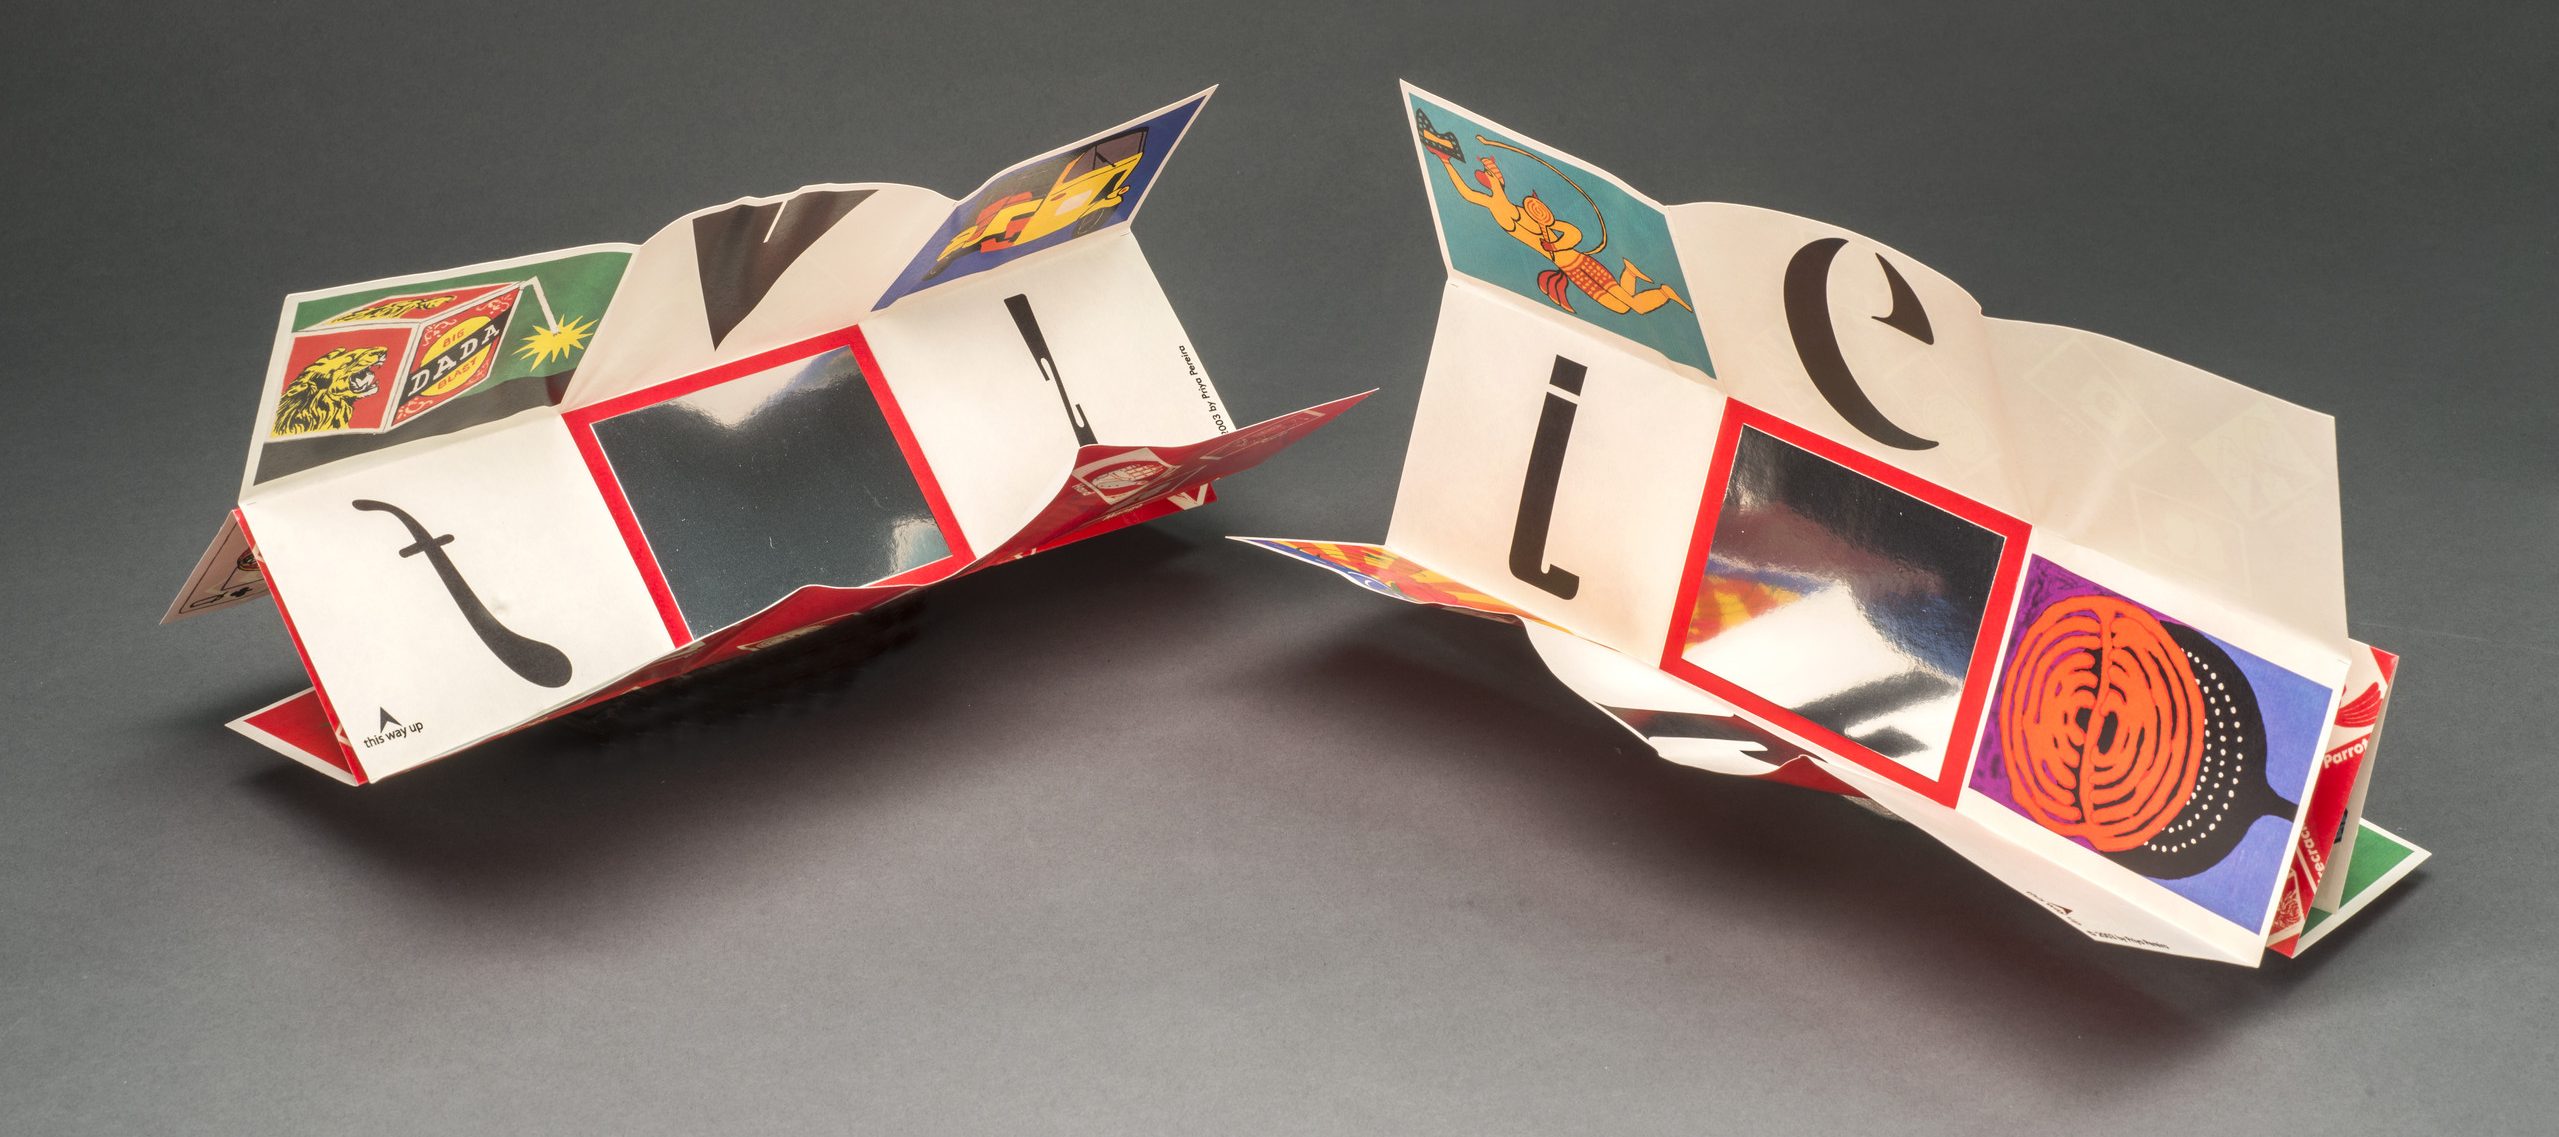 Two artists books with intricate folds and colorful panels sit side-by-side.